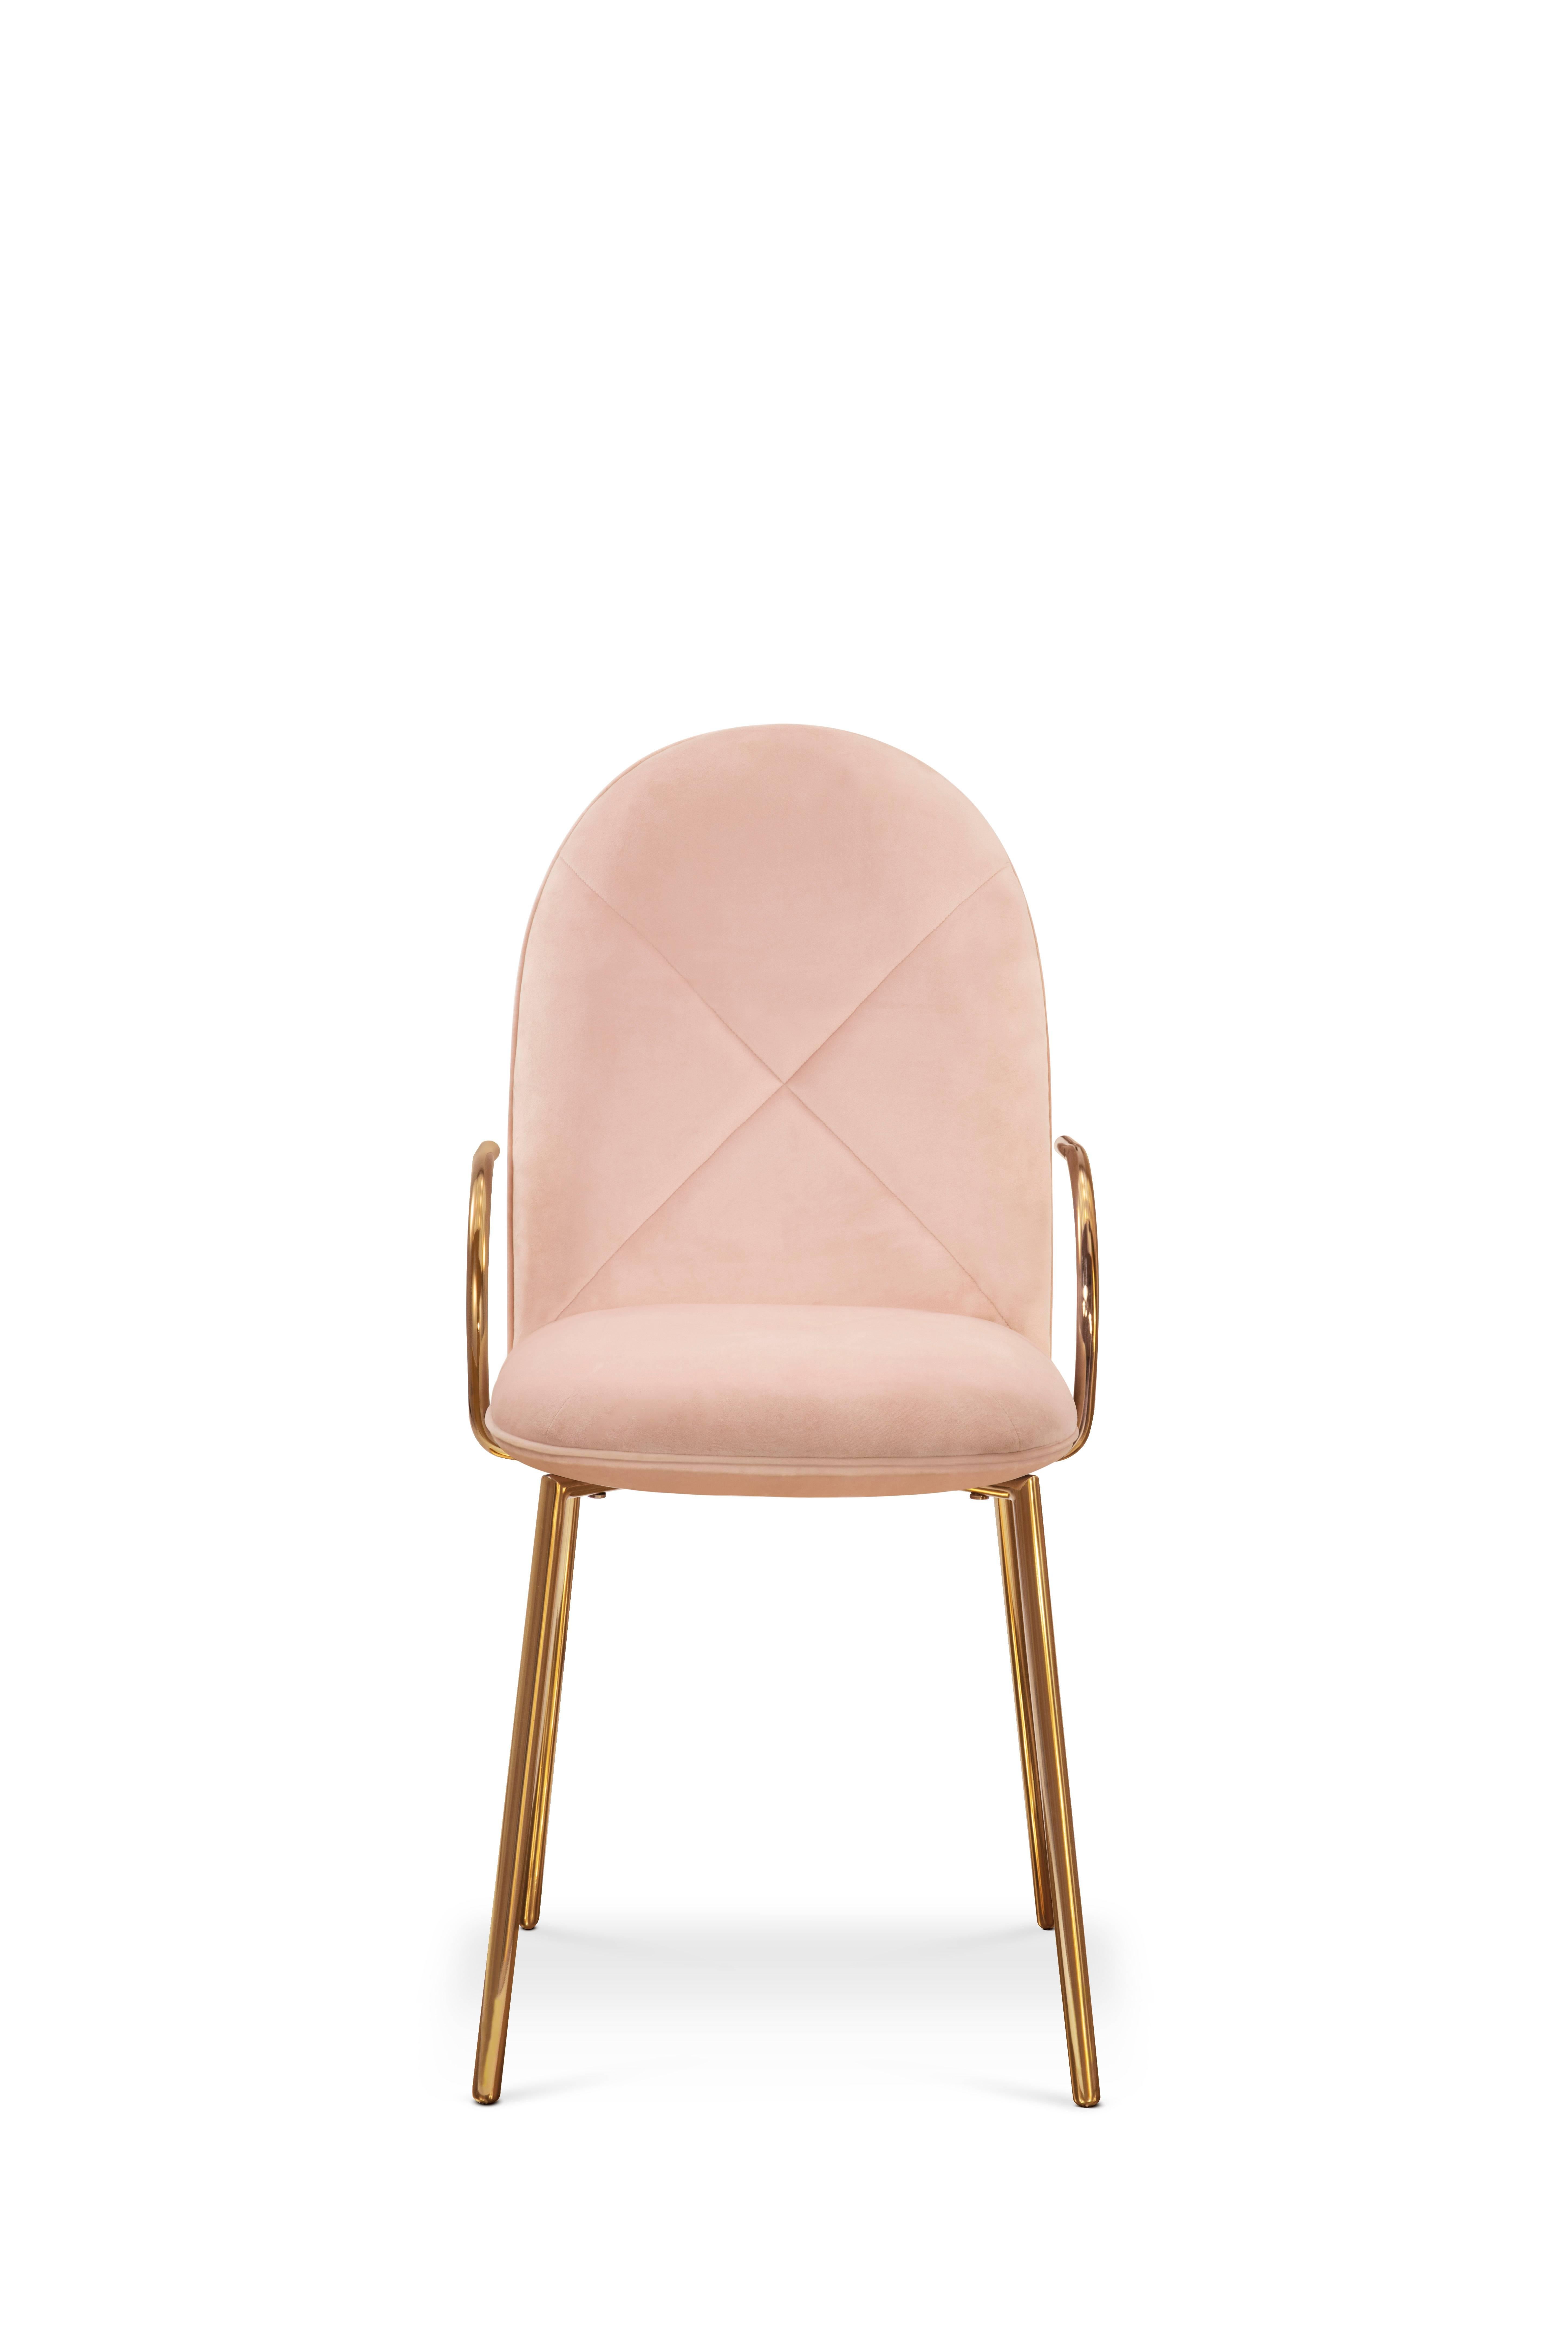 Other Orion Chair Blush Rose by Nika Zupanc for Scarlet Splendour For Sale